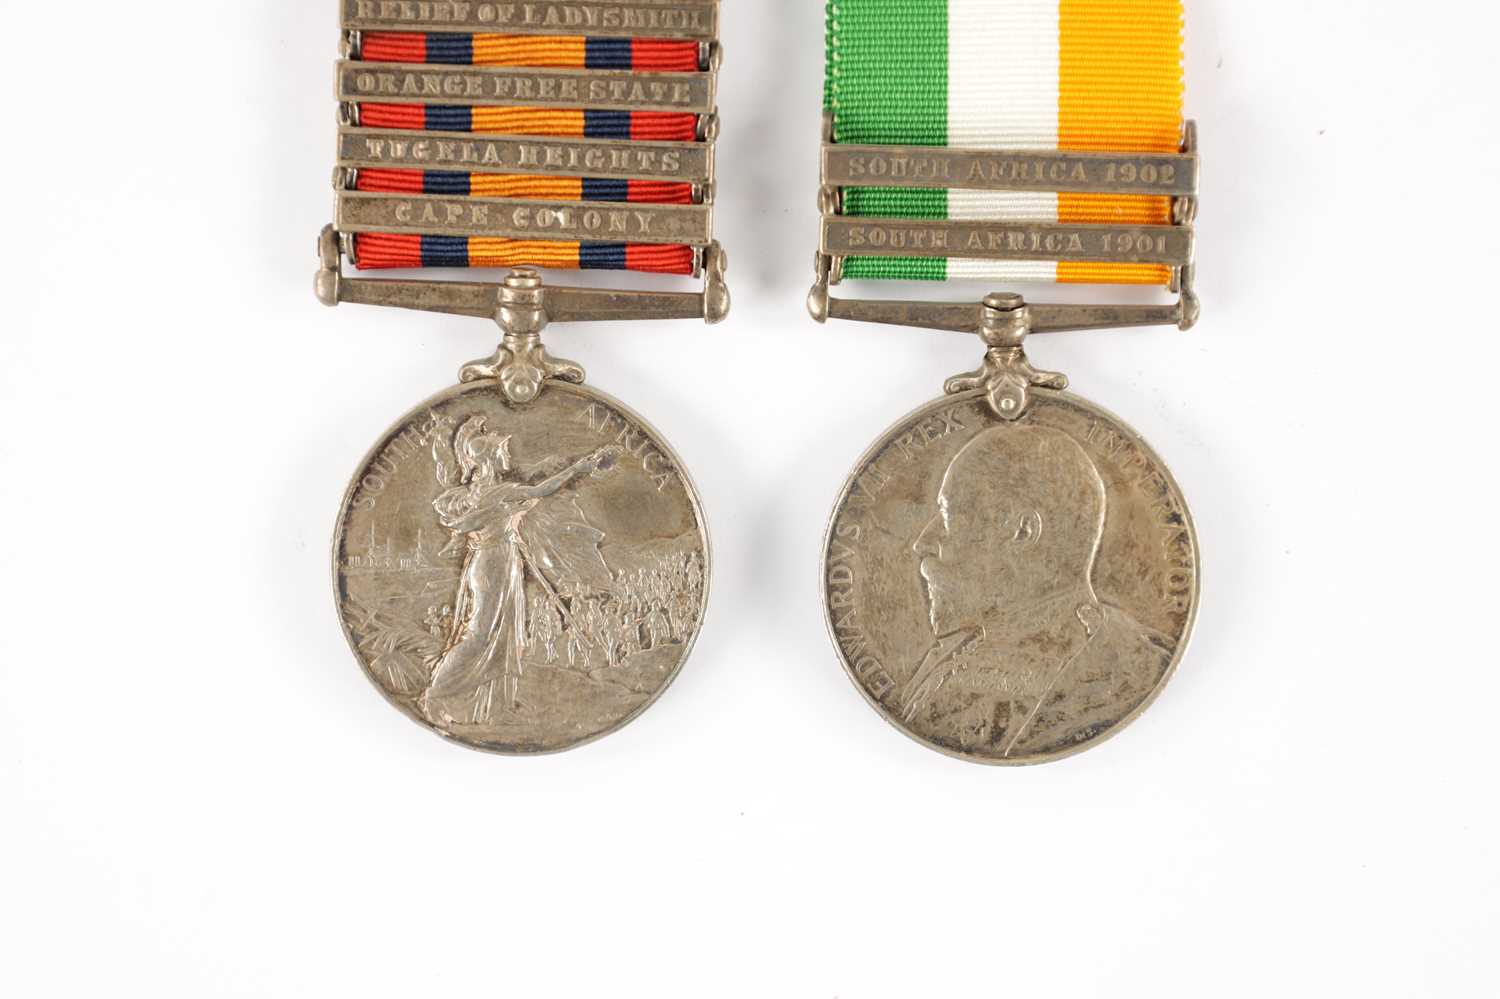 QUEENS SOUTH AFRICA MEDAL 1899-1902 WITH FIVE CLASPS, AND A BOER WAR MEDAL - Image 2 of 7